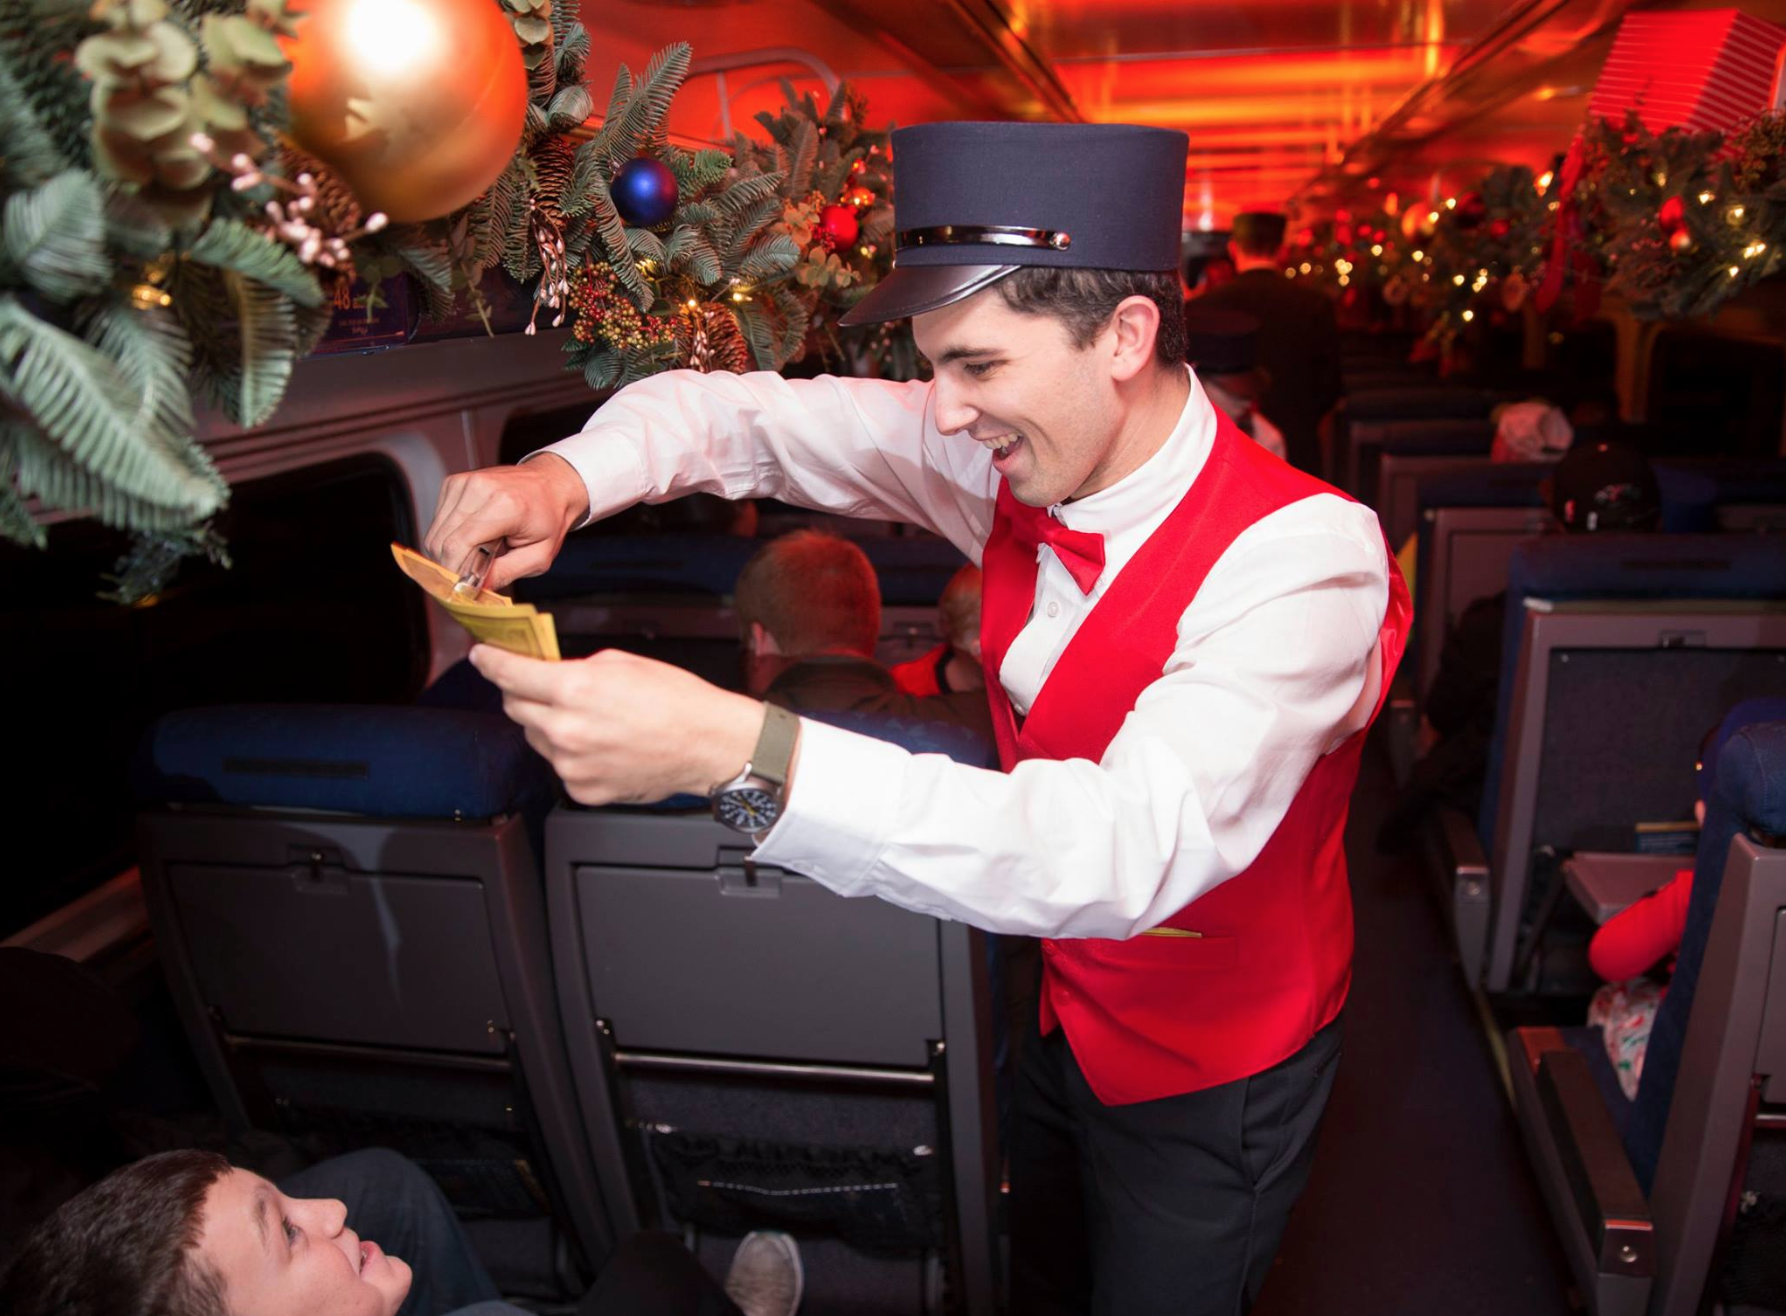 The Polar Express Train Ride Orlando: image of conductor marking golden ticket on train